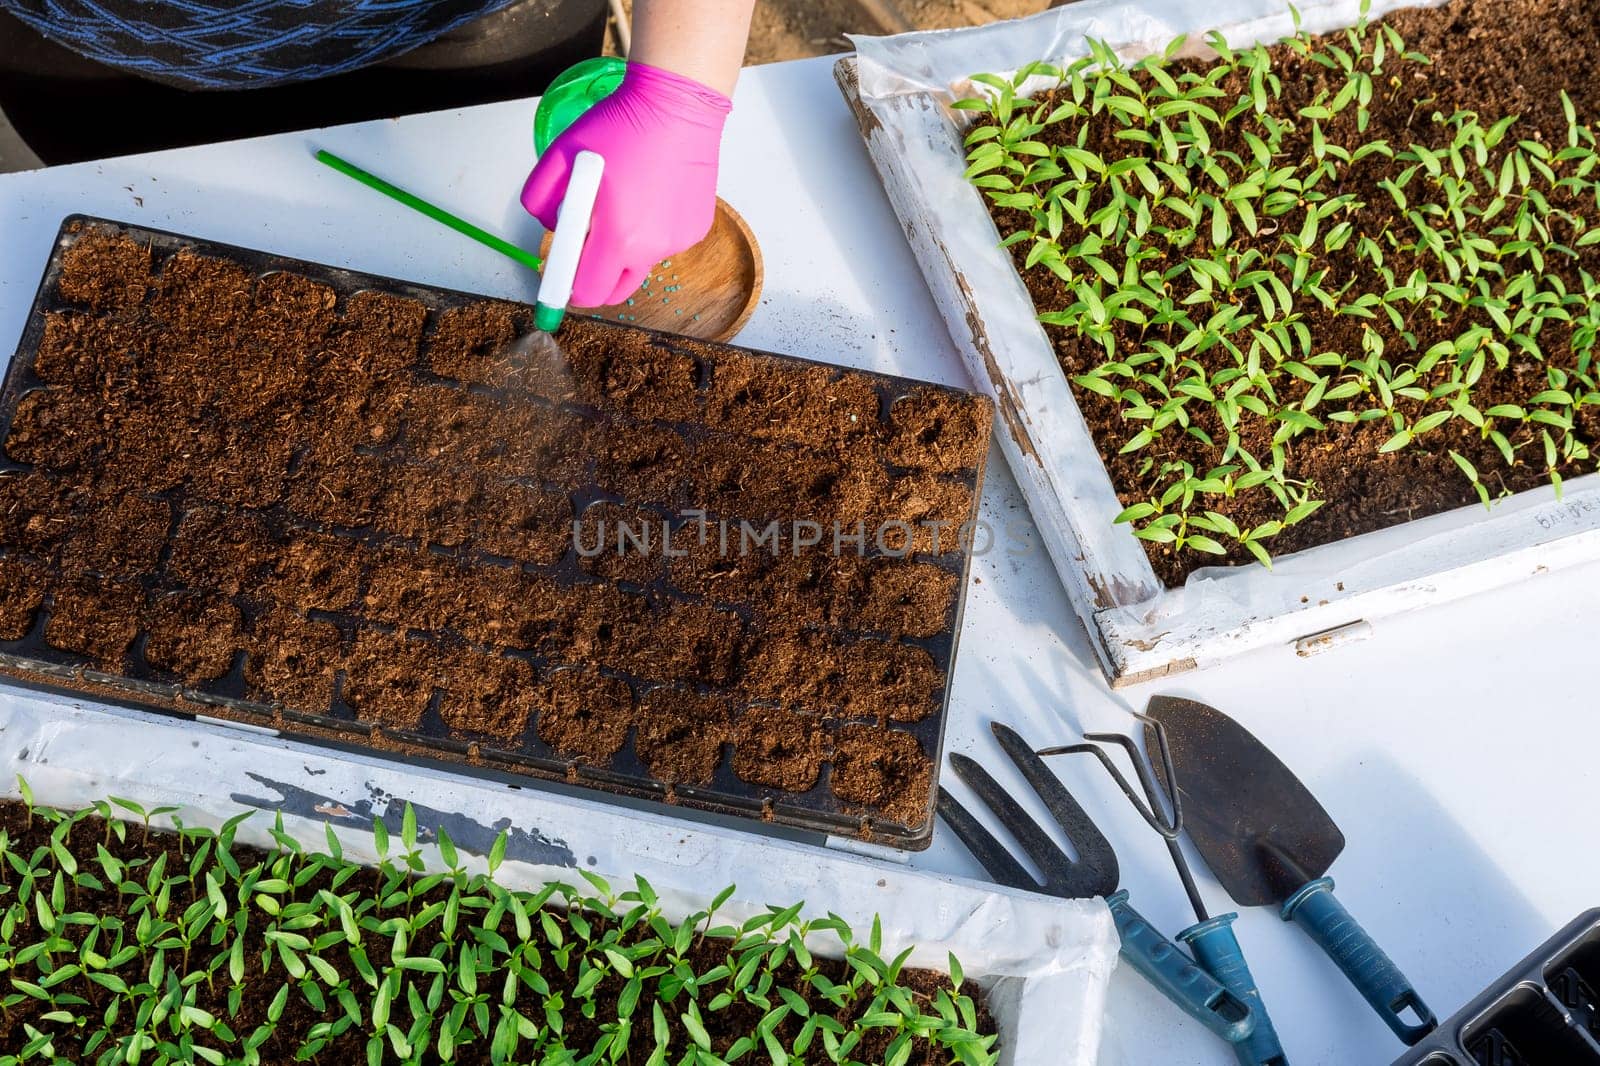 Art of pepper sowing requires careful consideration of soil conditions and proper spacing for optimal growth.